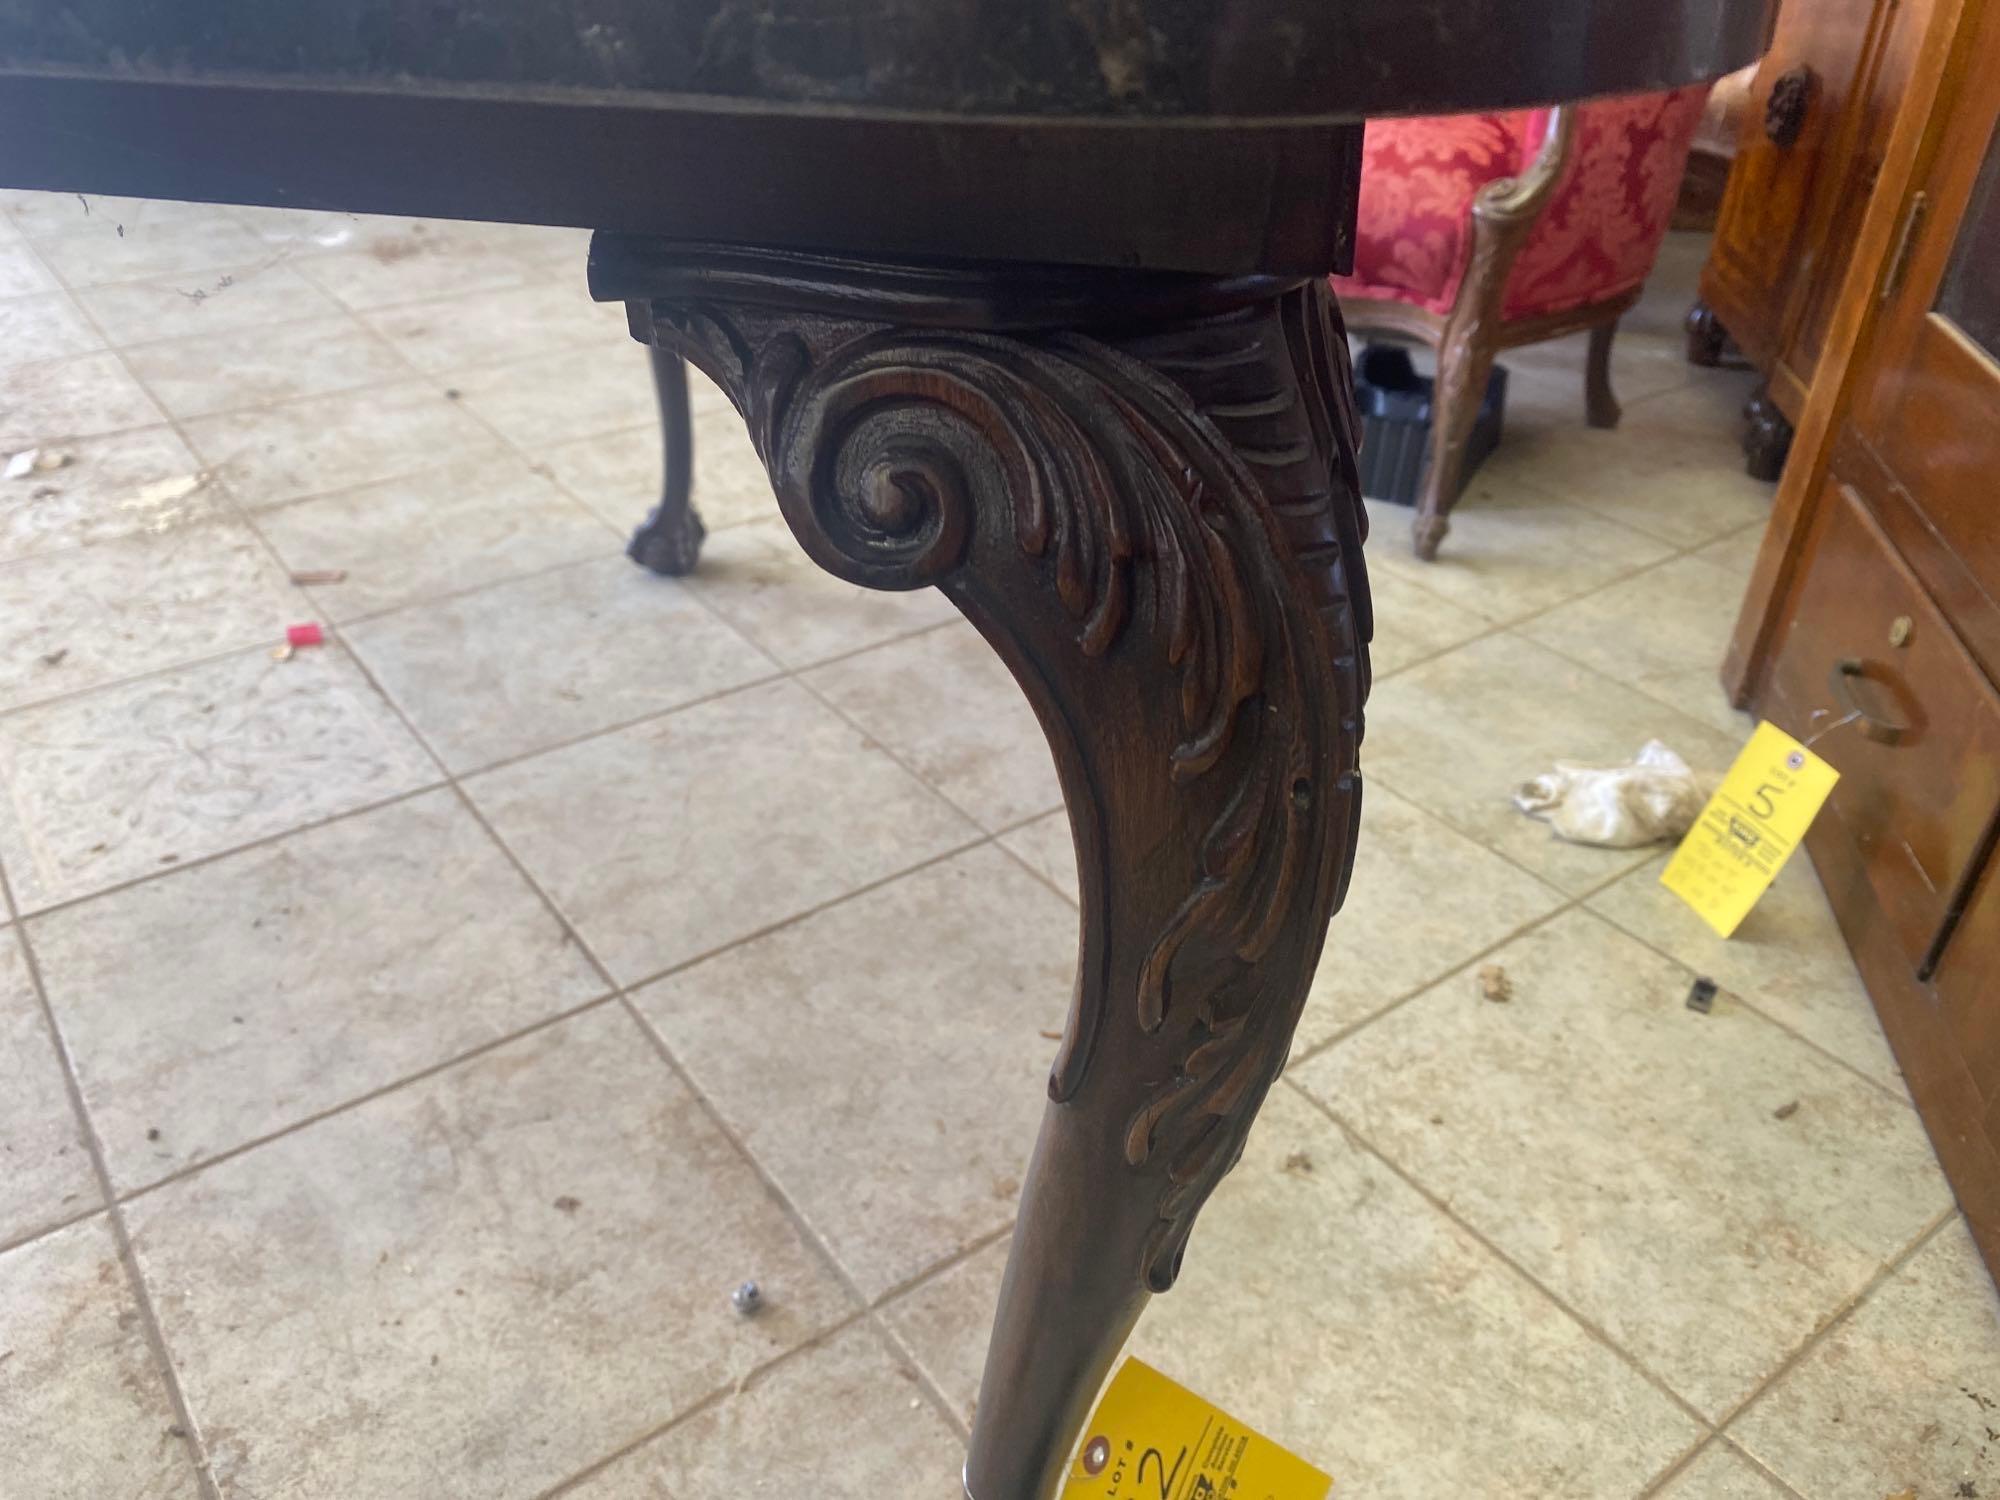 Early Carved Wood Marble Top Console Table